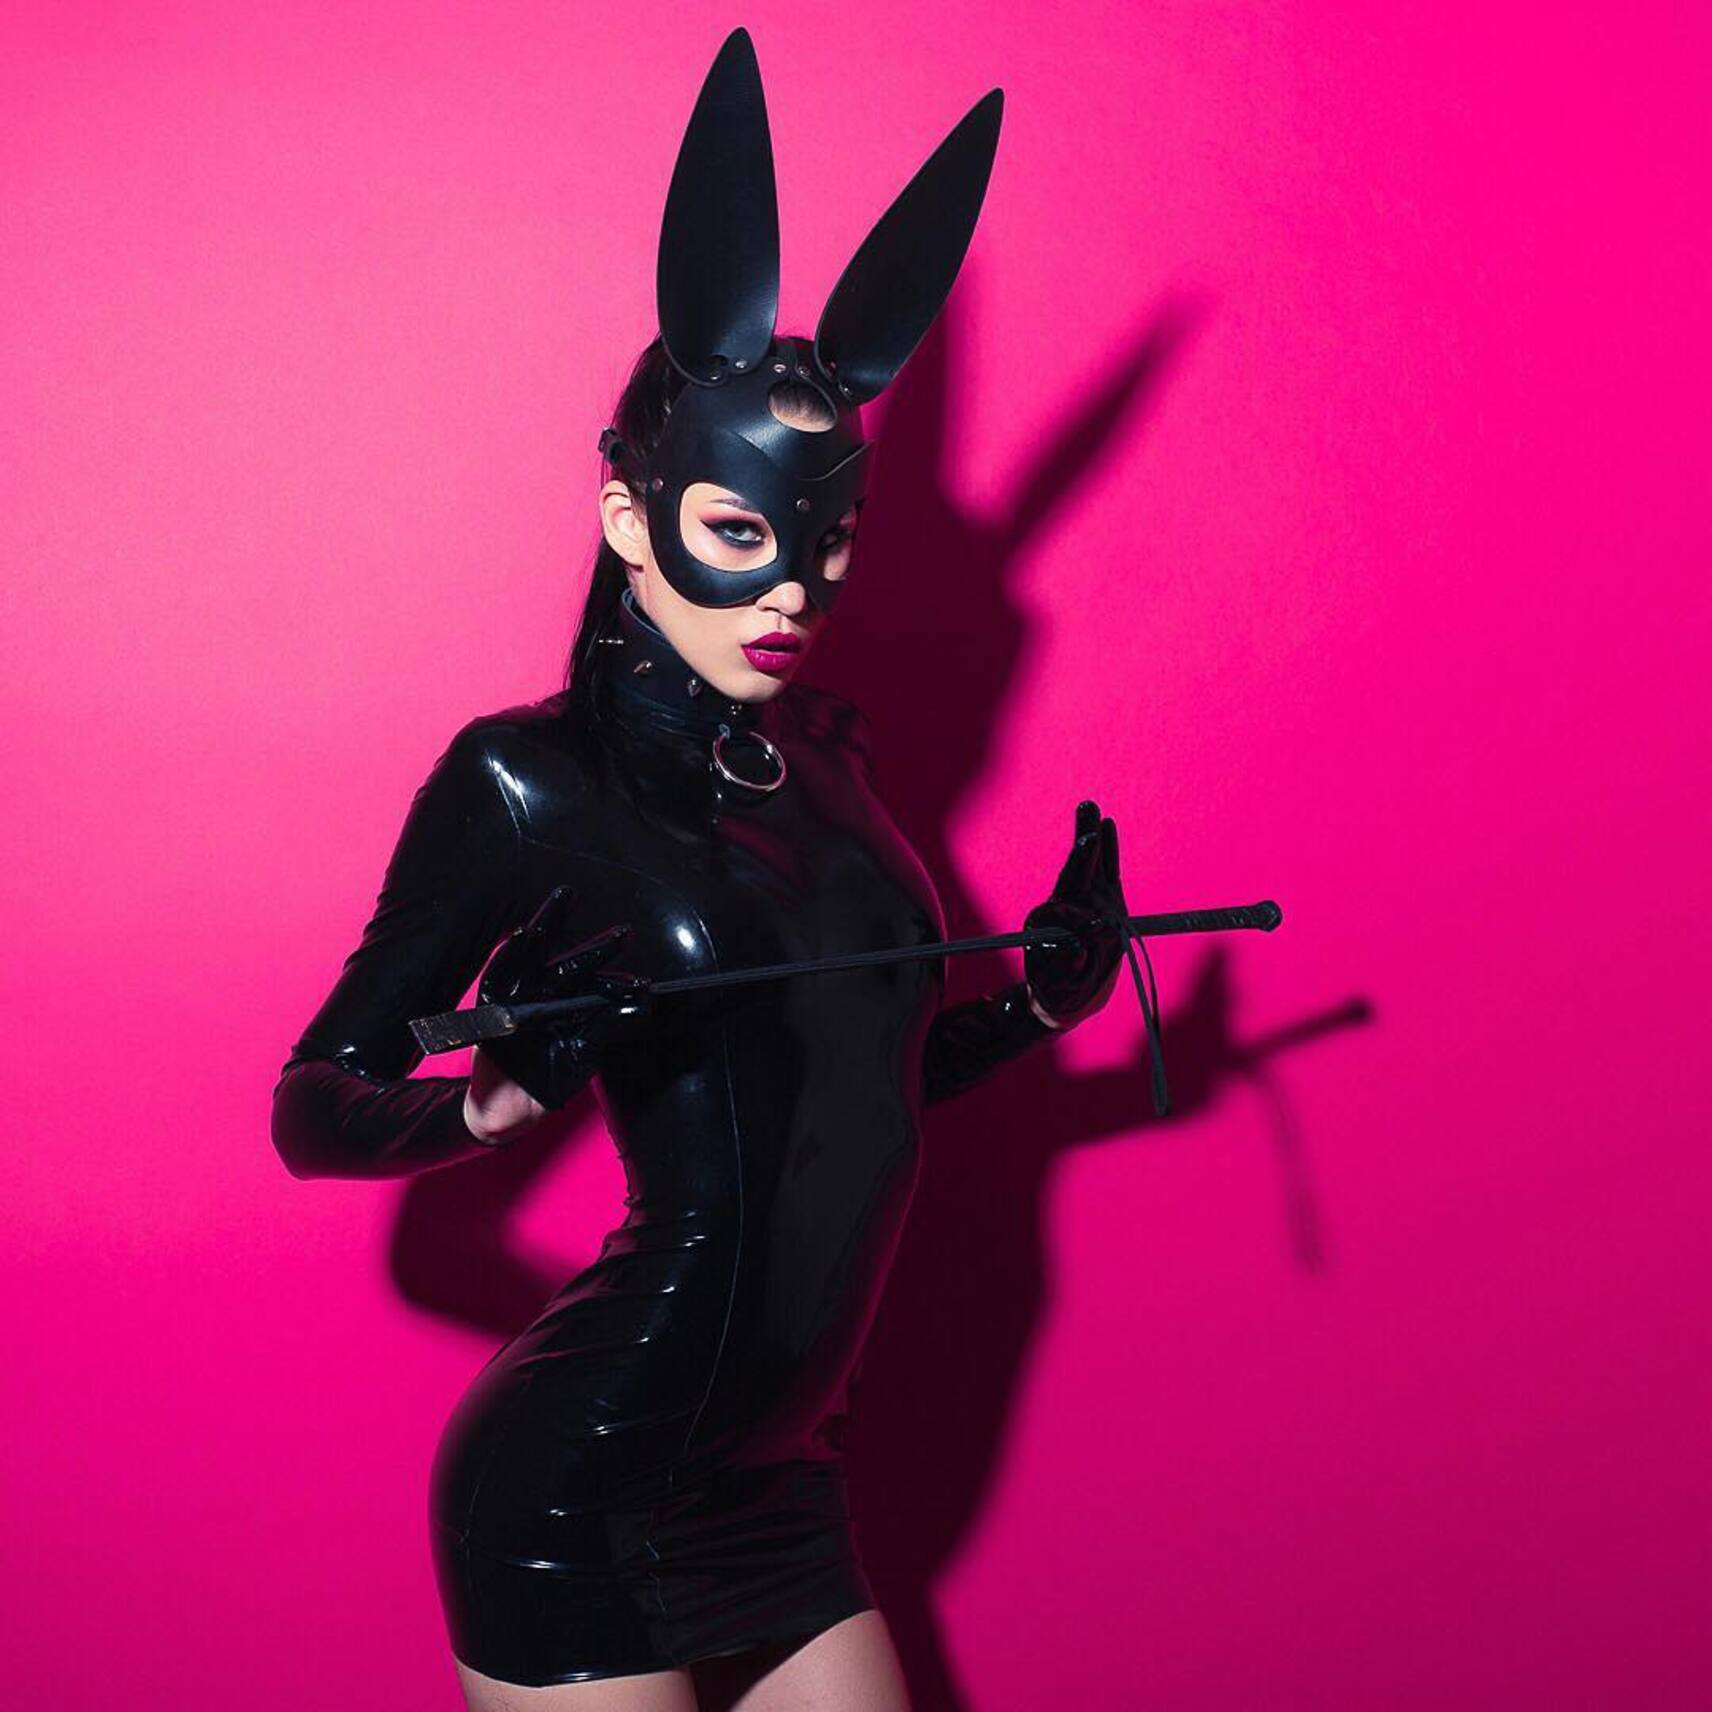 Woman Leather bunny mask black with slits for eyes and clasp at the back